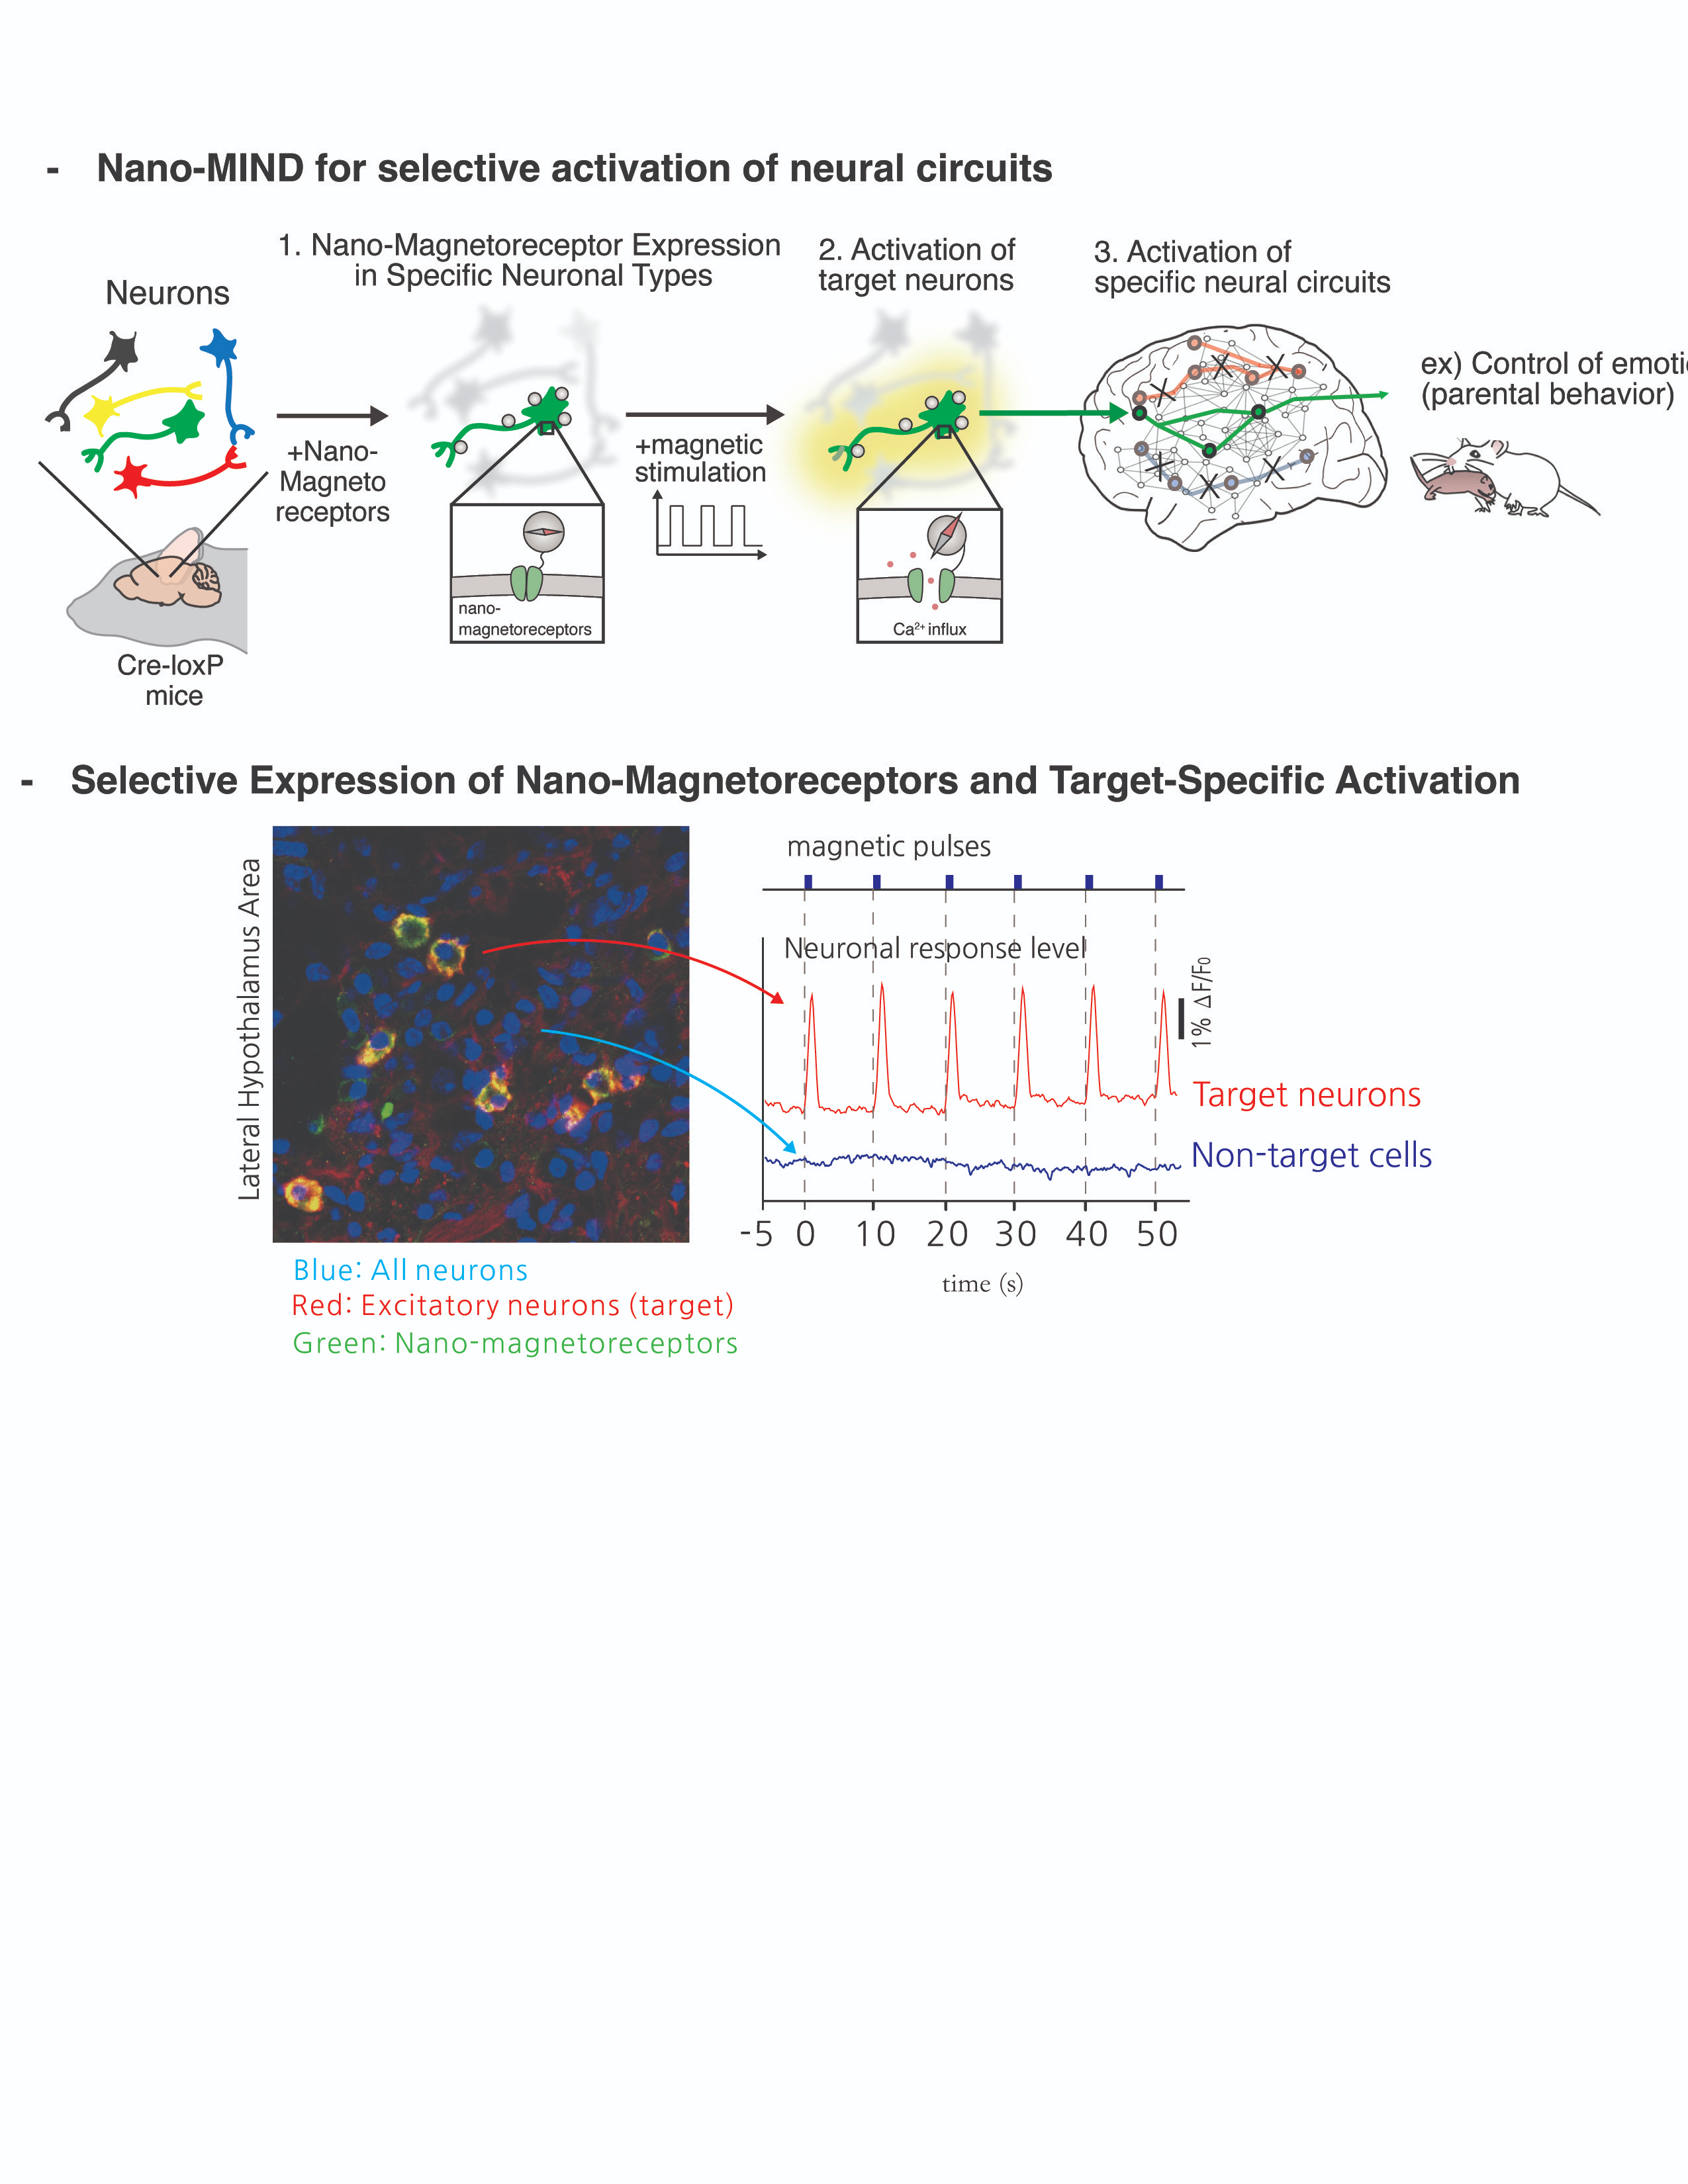 Figure 2. Activation of specific neurons and brain circuits through nano-MIND technology